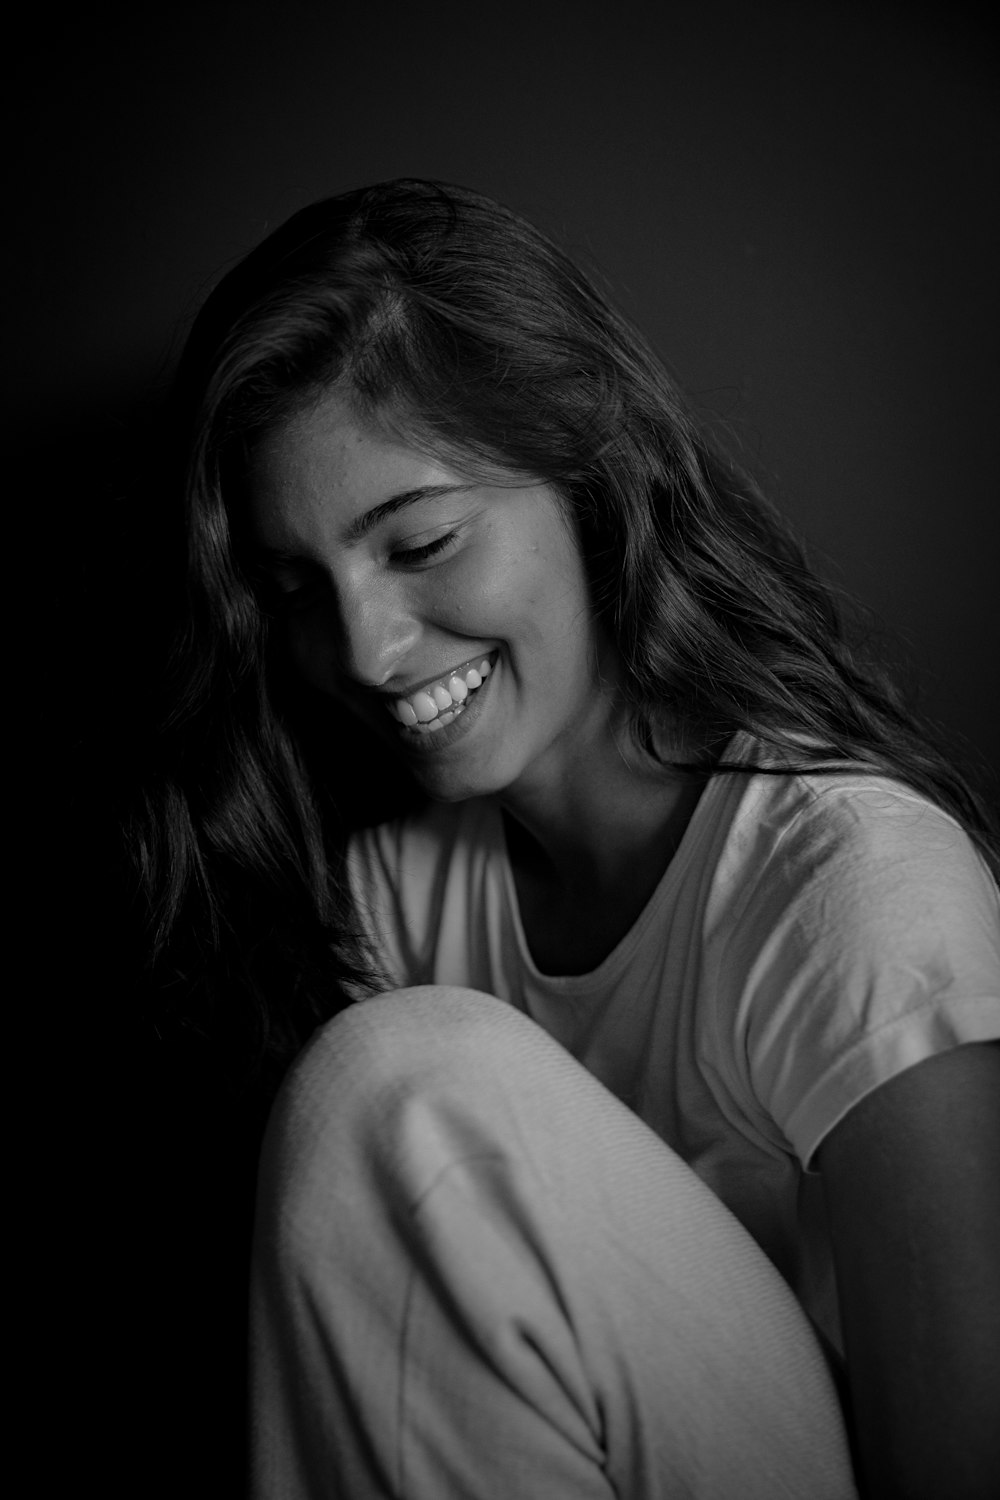 woman in white t-shirt smiling